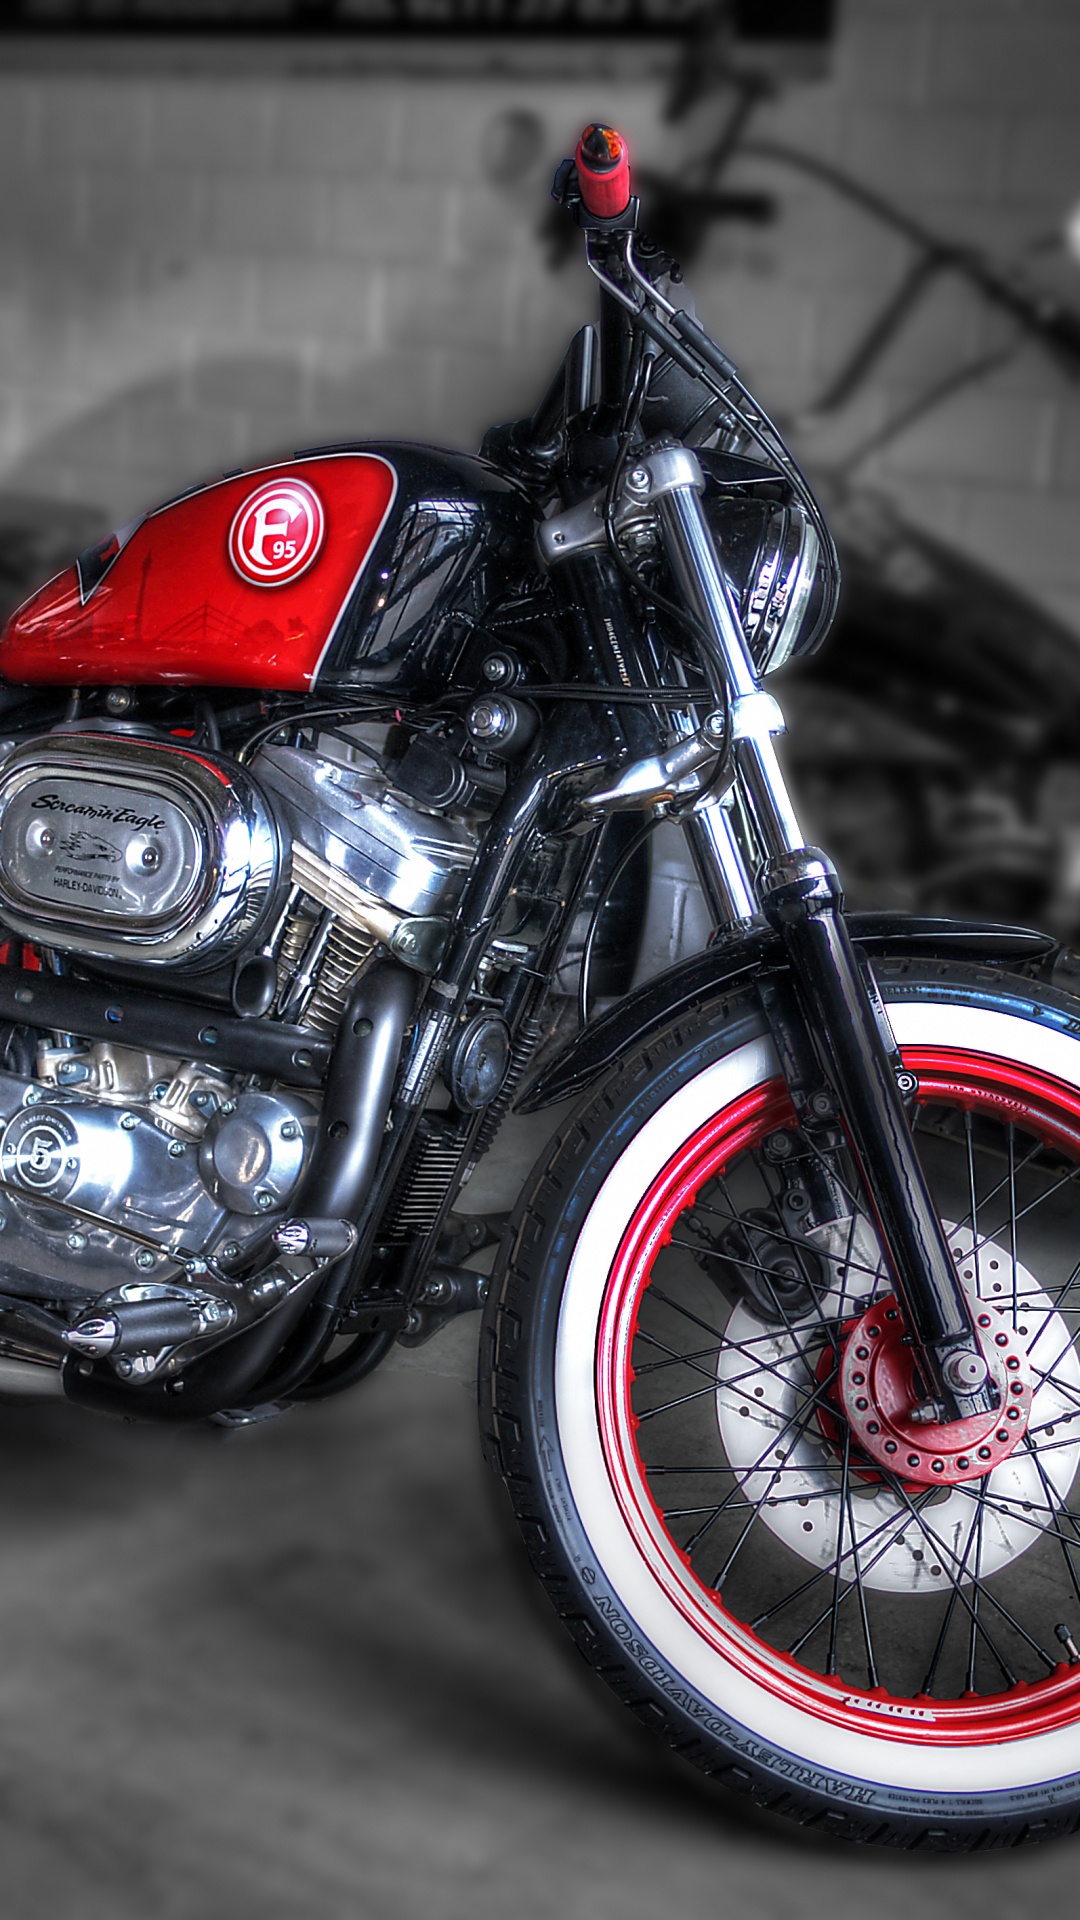 Red and Black Cruiser Motorcycle. Wallpaper in 1080x1920 Resolution